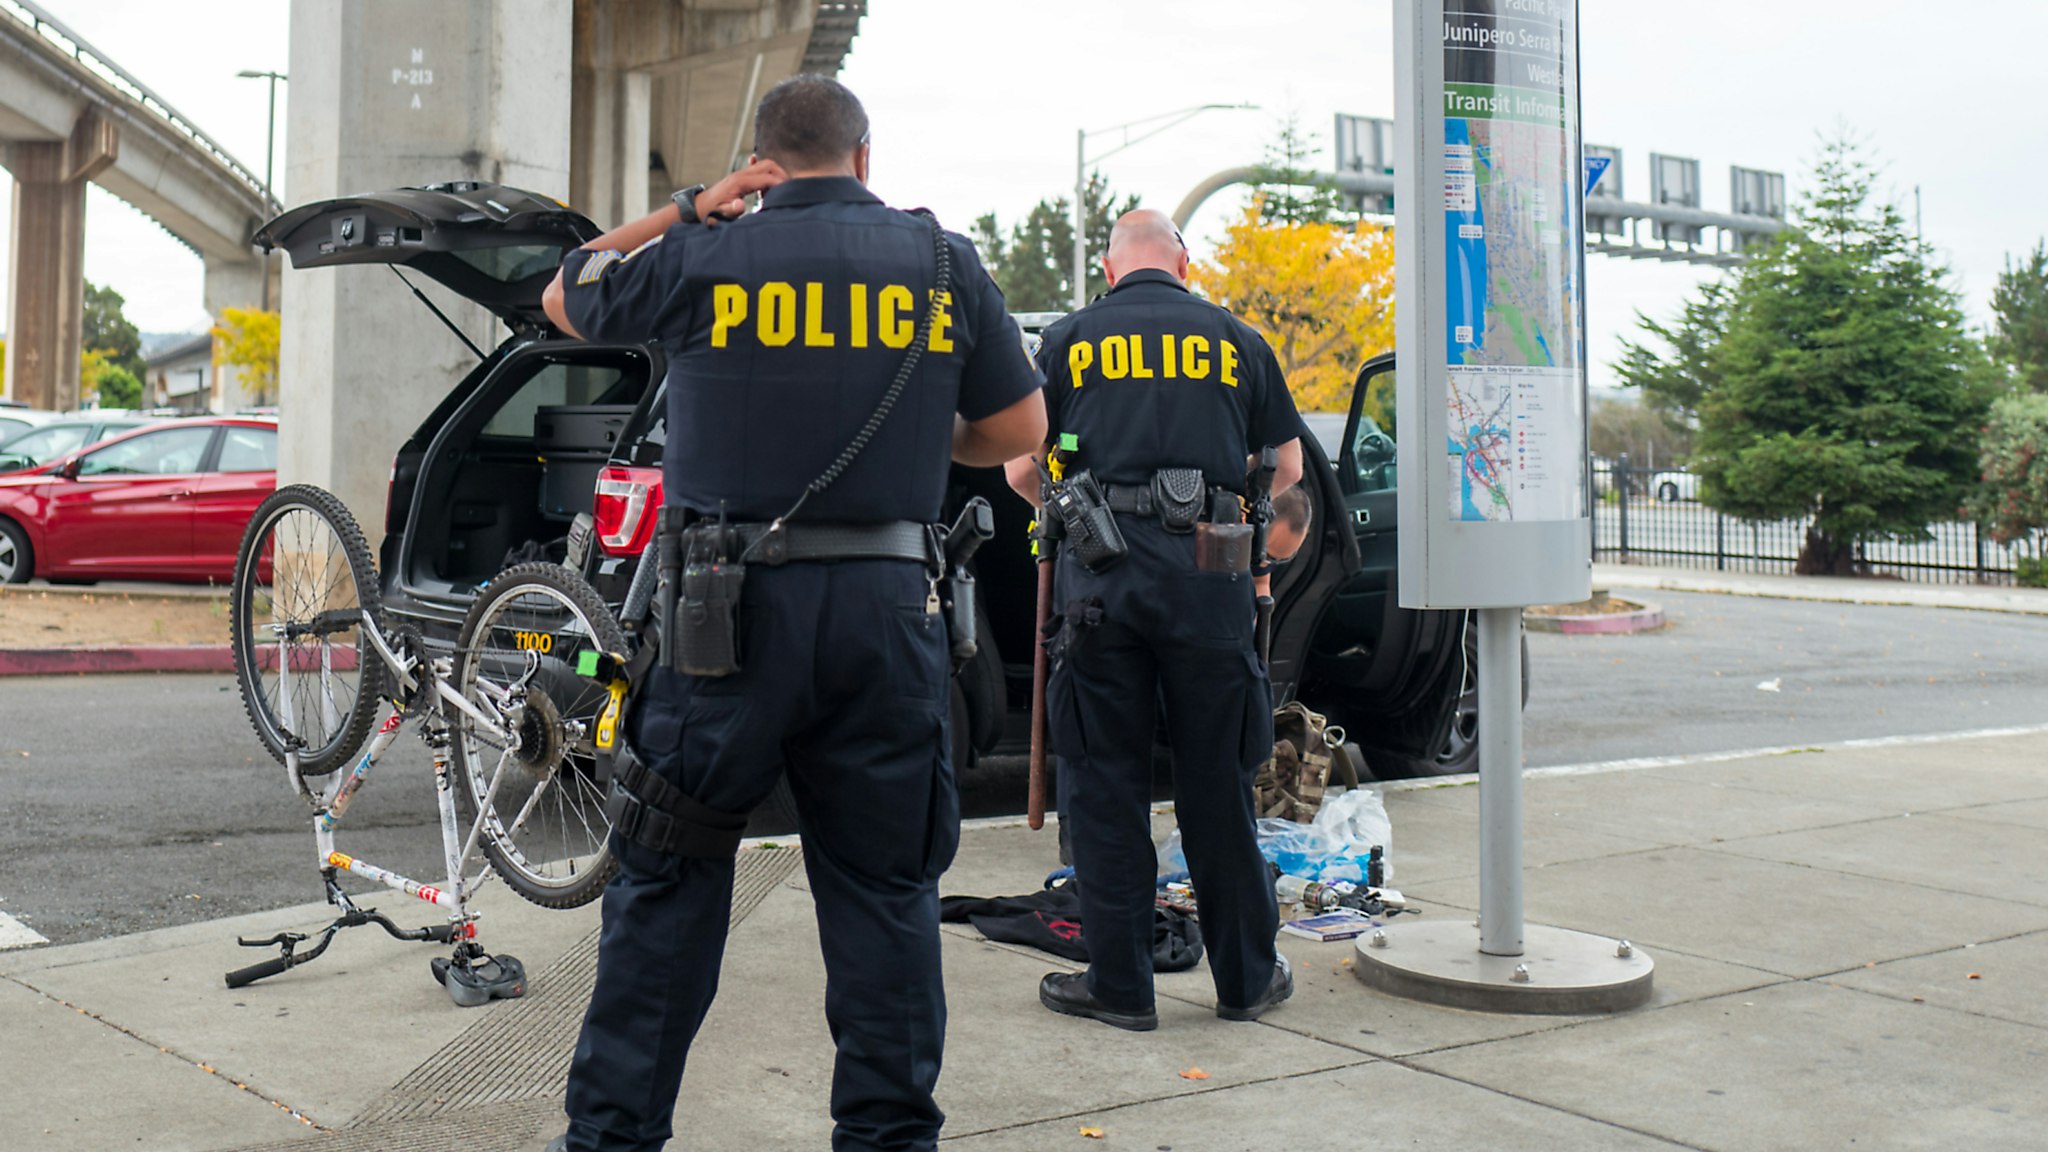 Two Bay Area Rapid Transit (BART) police officers are viewed from behind, with an overturned bicycle and bag with sorted contraband on the sidewalk in front of the officers, in the San Francisco Bay Area town of Daly City, California, November 3, 2017.